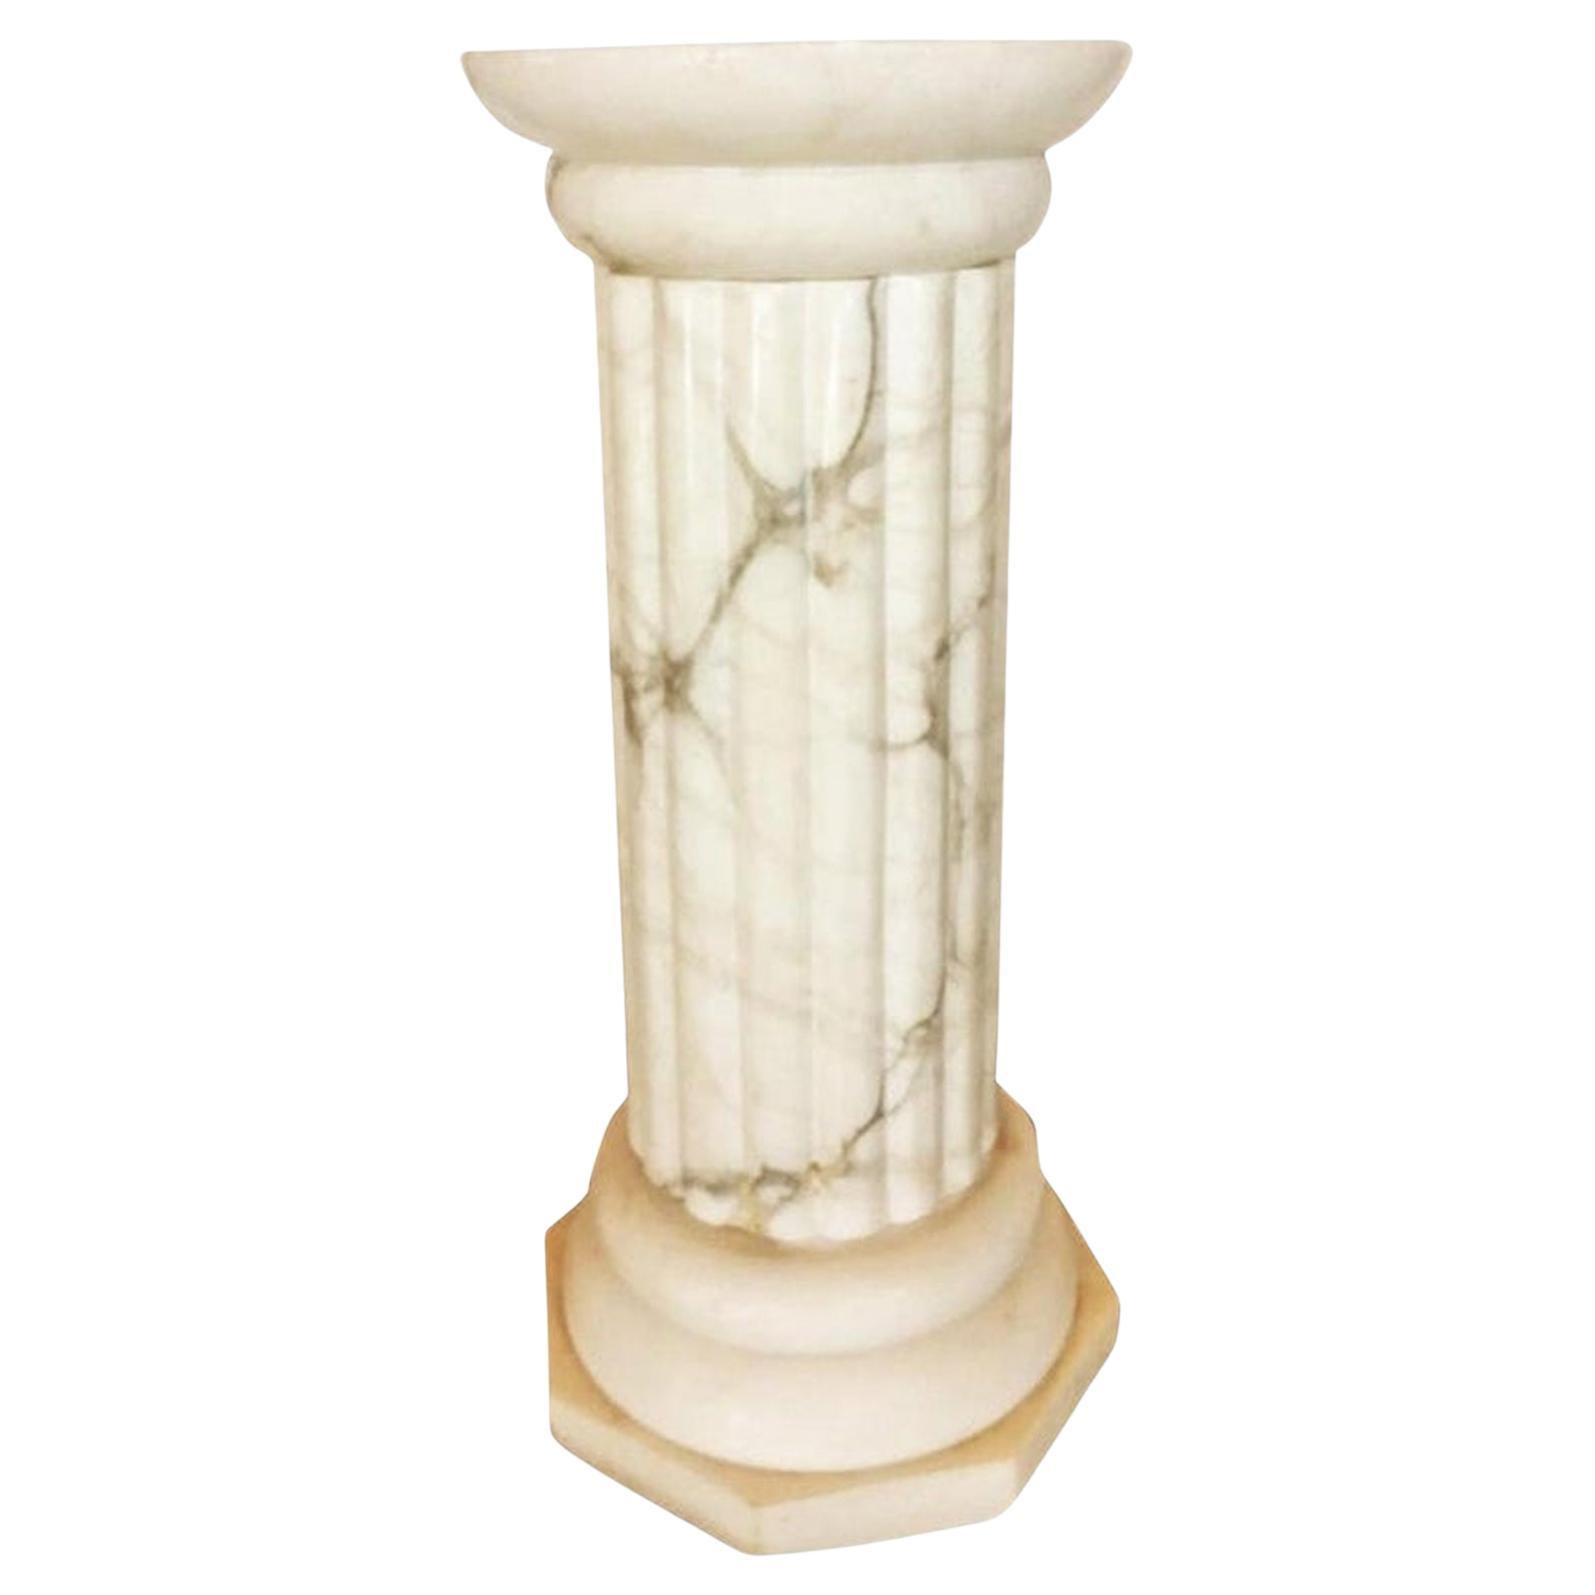 Flor Lamp / Pedestal 
Alabaster very well preserved, without stains or color changes
 
Flor Lamp Pedestal illuminated  Alabaster Marble White Greek Colunm Form, Italy

Italian white alabaster carved floor lamp with interior lighting
mid-20th